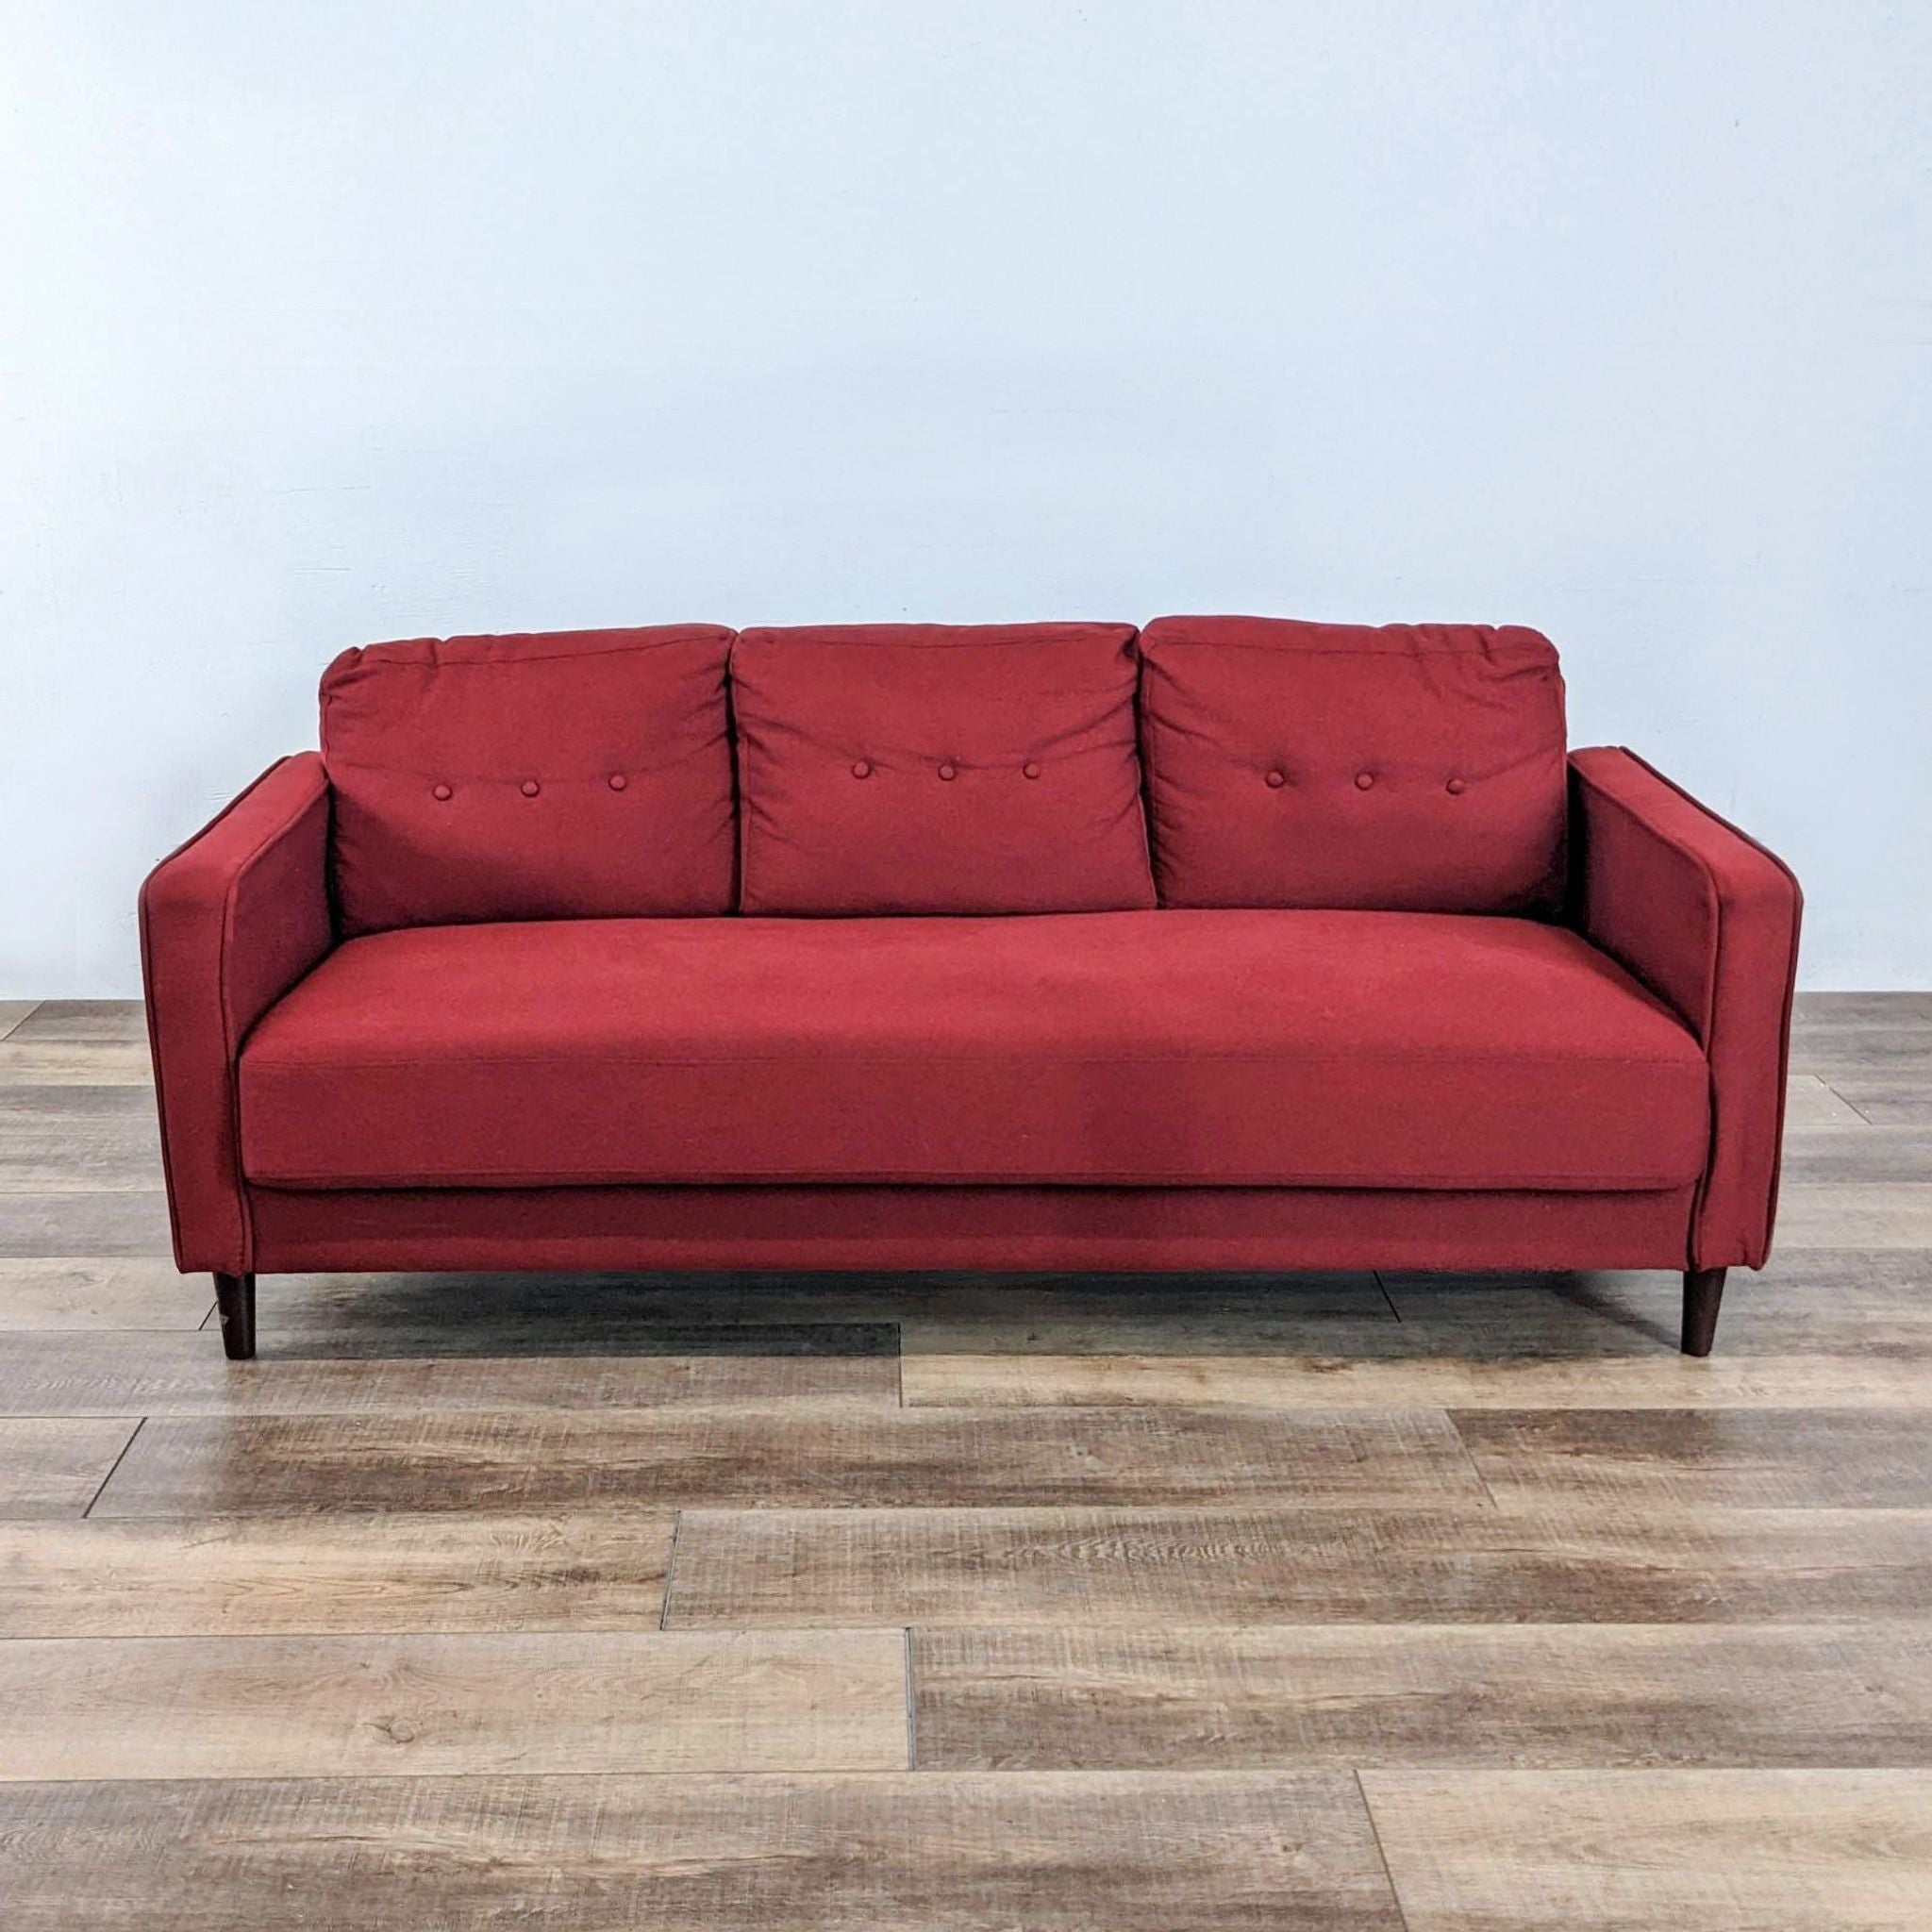 1. Zinus Mikhail Mid-Century 3-seat Sofa with red upholstery, button tufting, and tapered wood legs, on a wood floor.